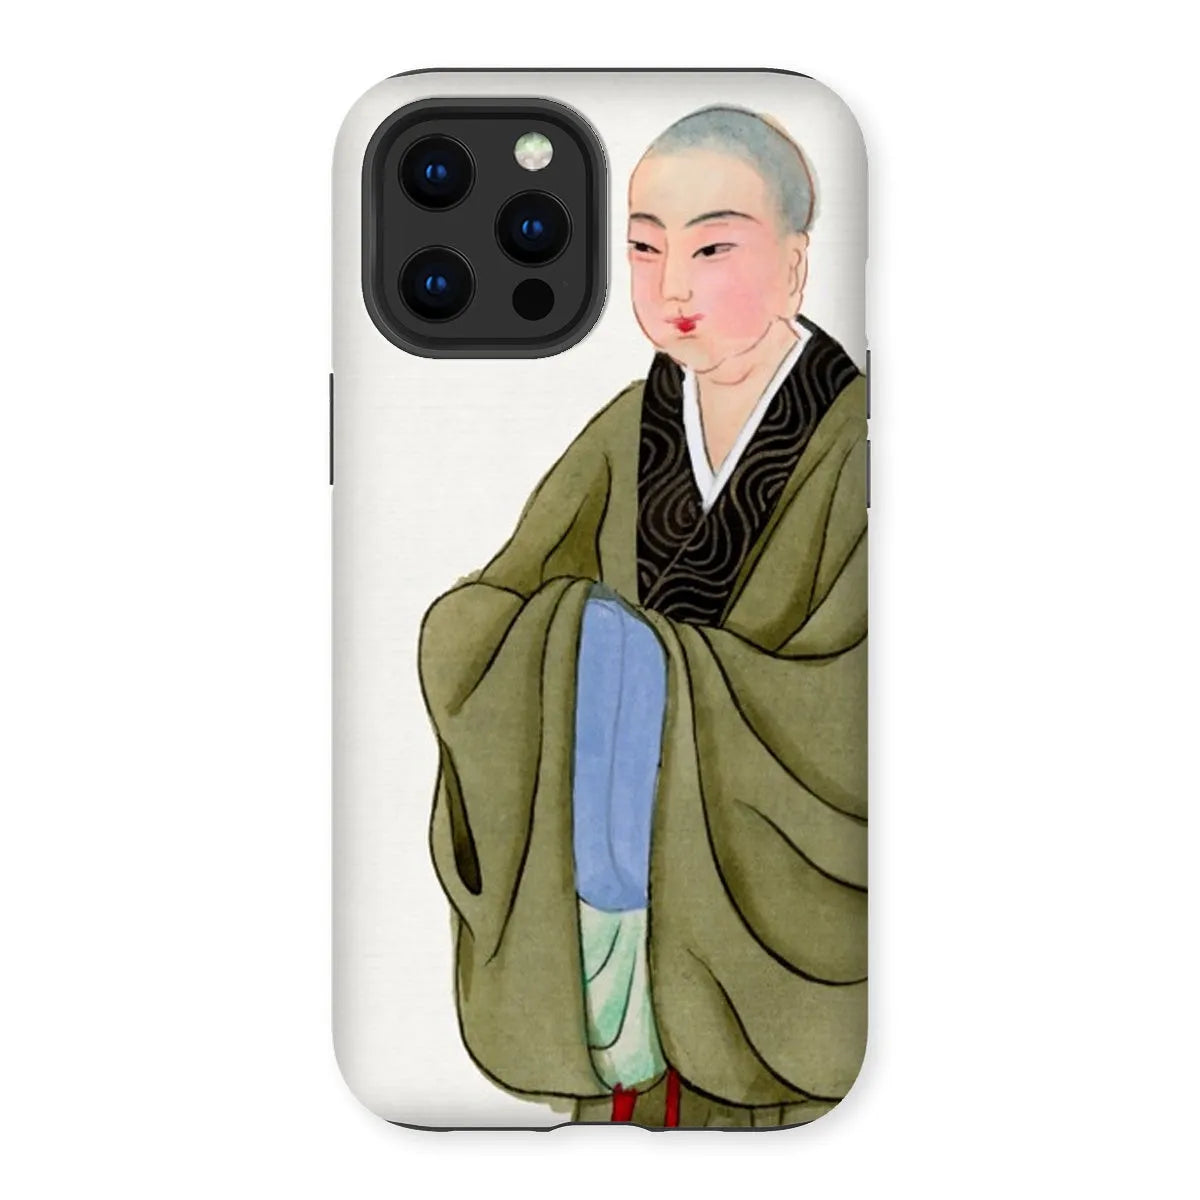 Buddhist Monk - Manchu Chinese Aesthetic Art Phone Case - Iphone 12 Pro Max / Matte - Mobile Phone Cases - Aesthetic Art